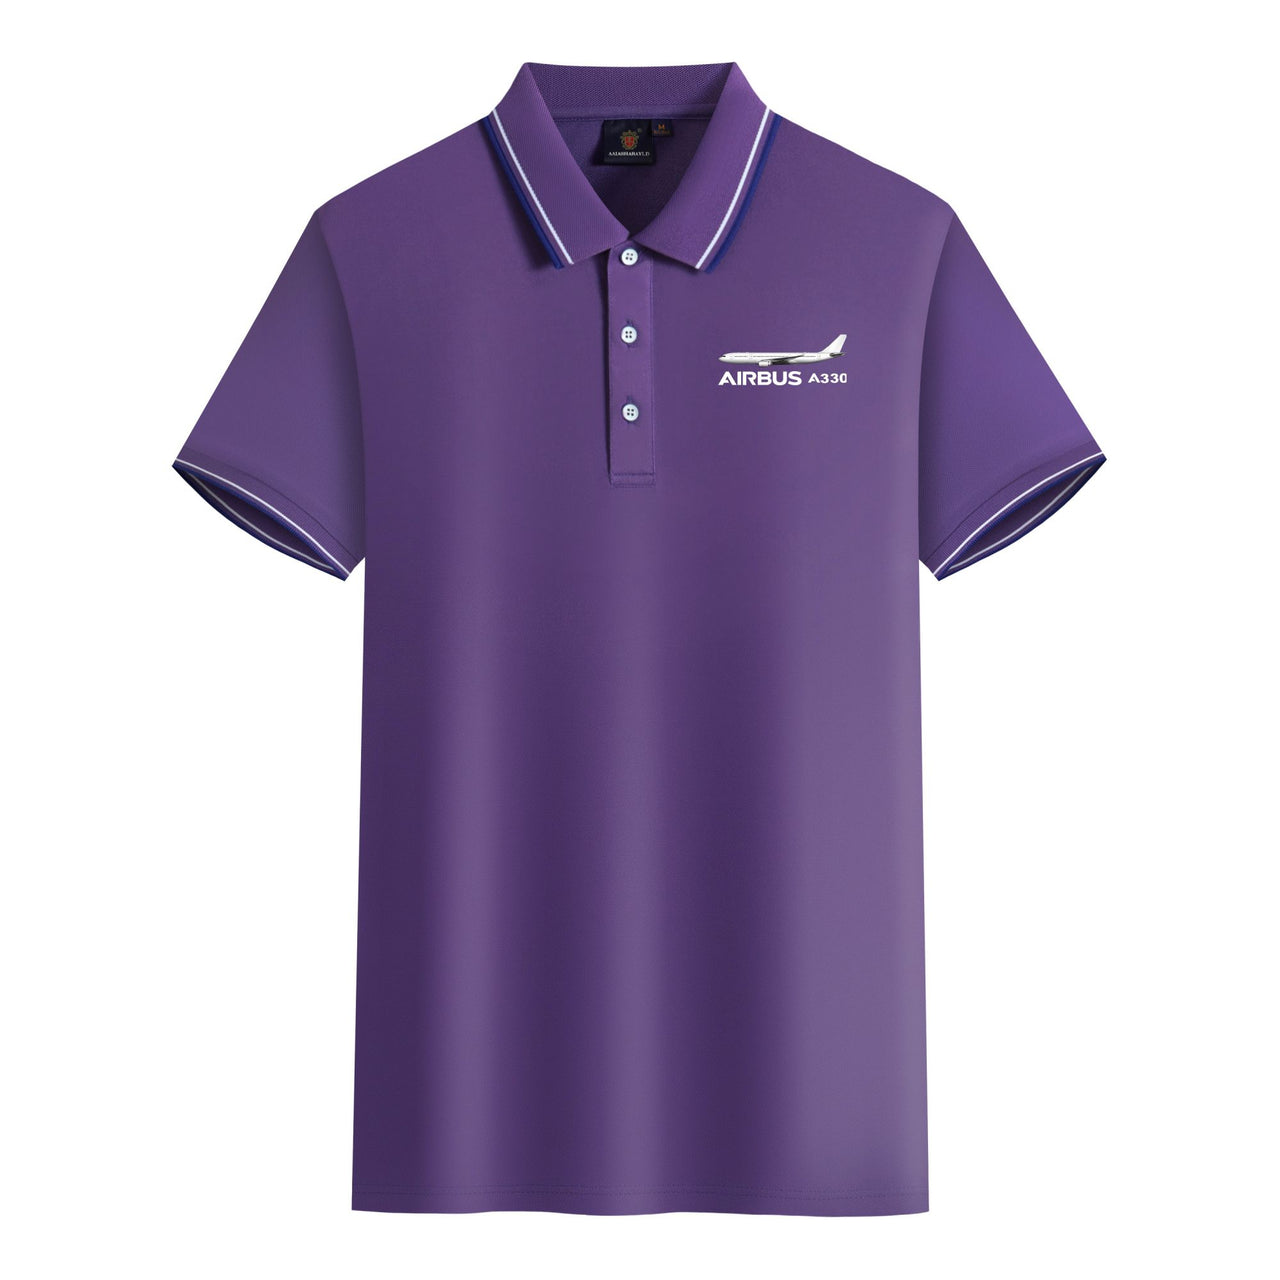 The Airbus A330 Designed Stylish Polo T-Shirts